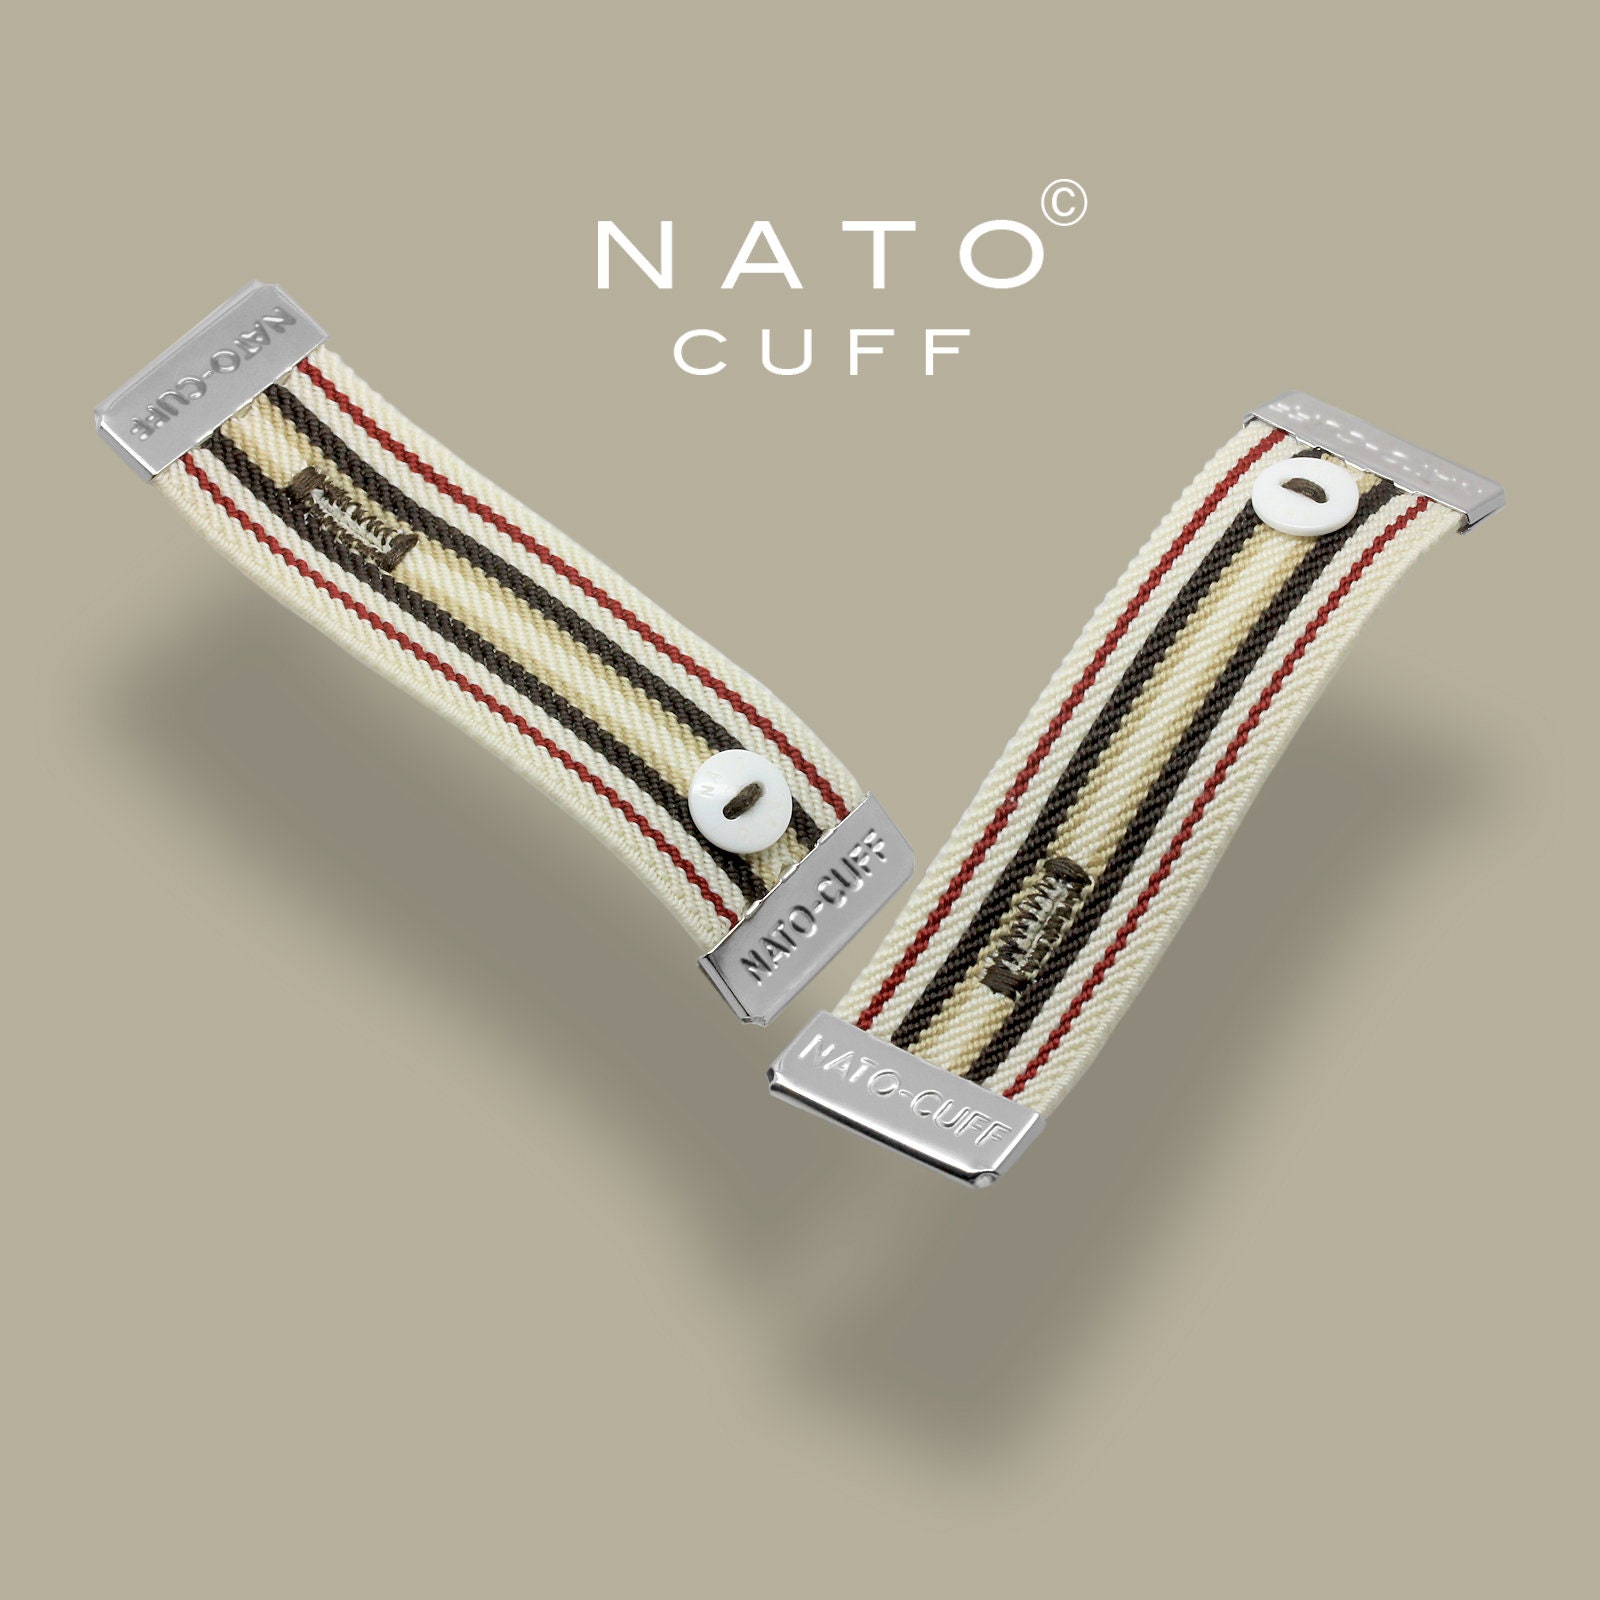 NATO Cuff – Handmade in France - Pull Up Your Shirt Sleeves with Elegance - Elastic Anti-Slip Shirt Cuff Holder